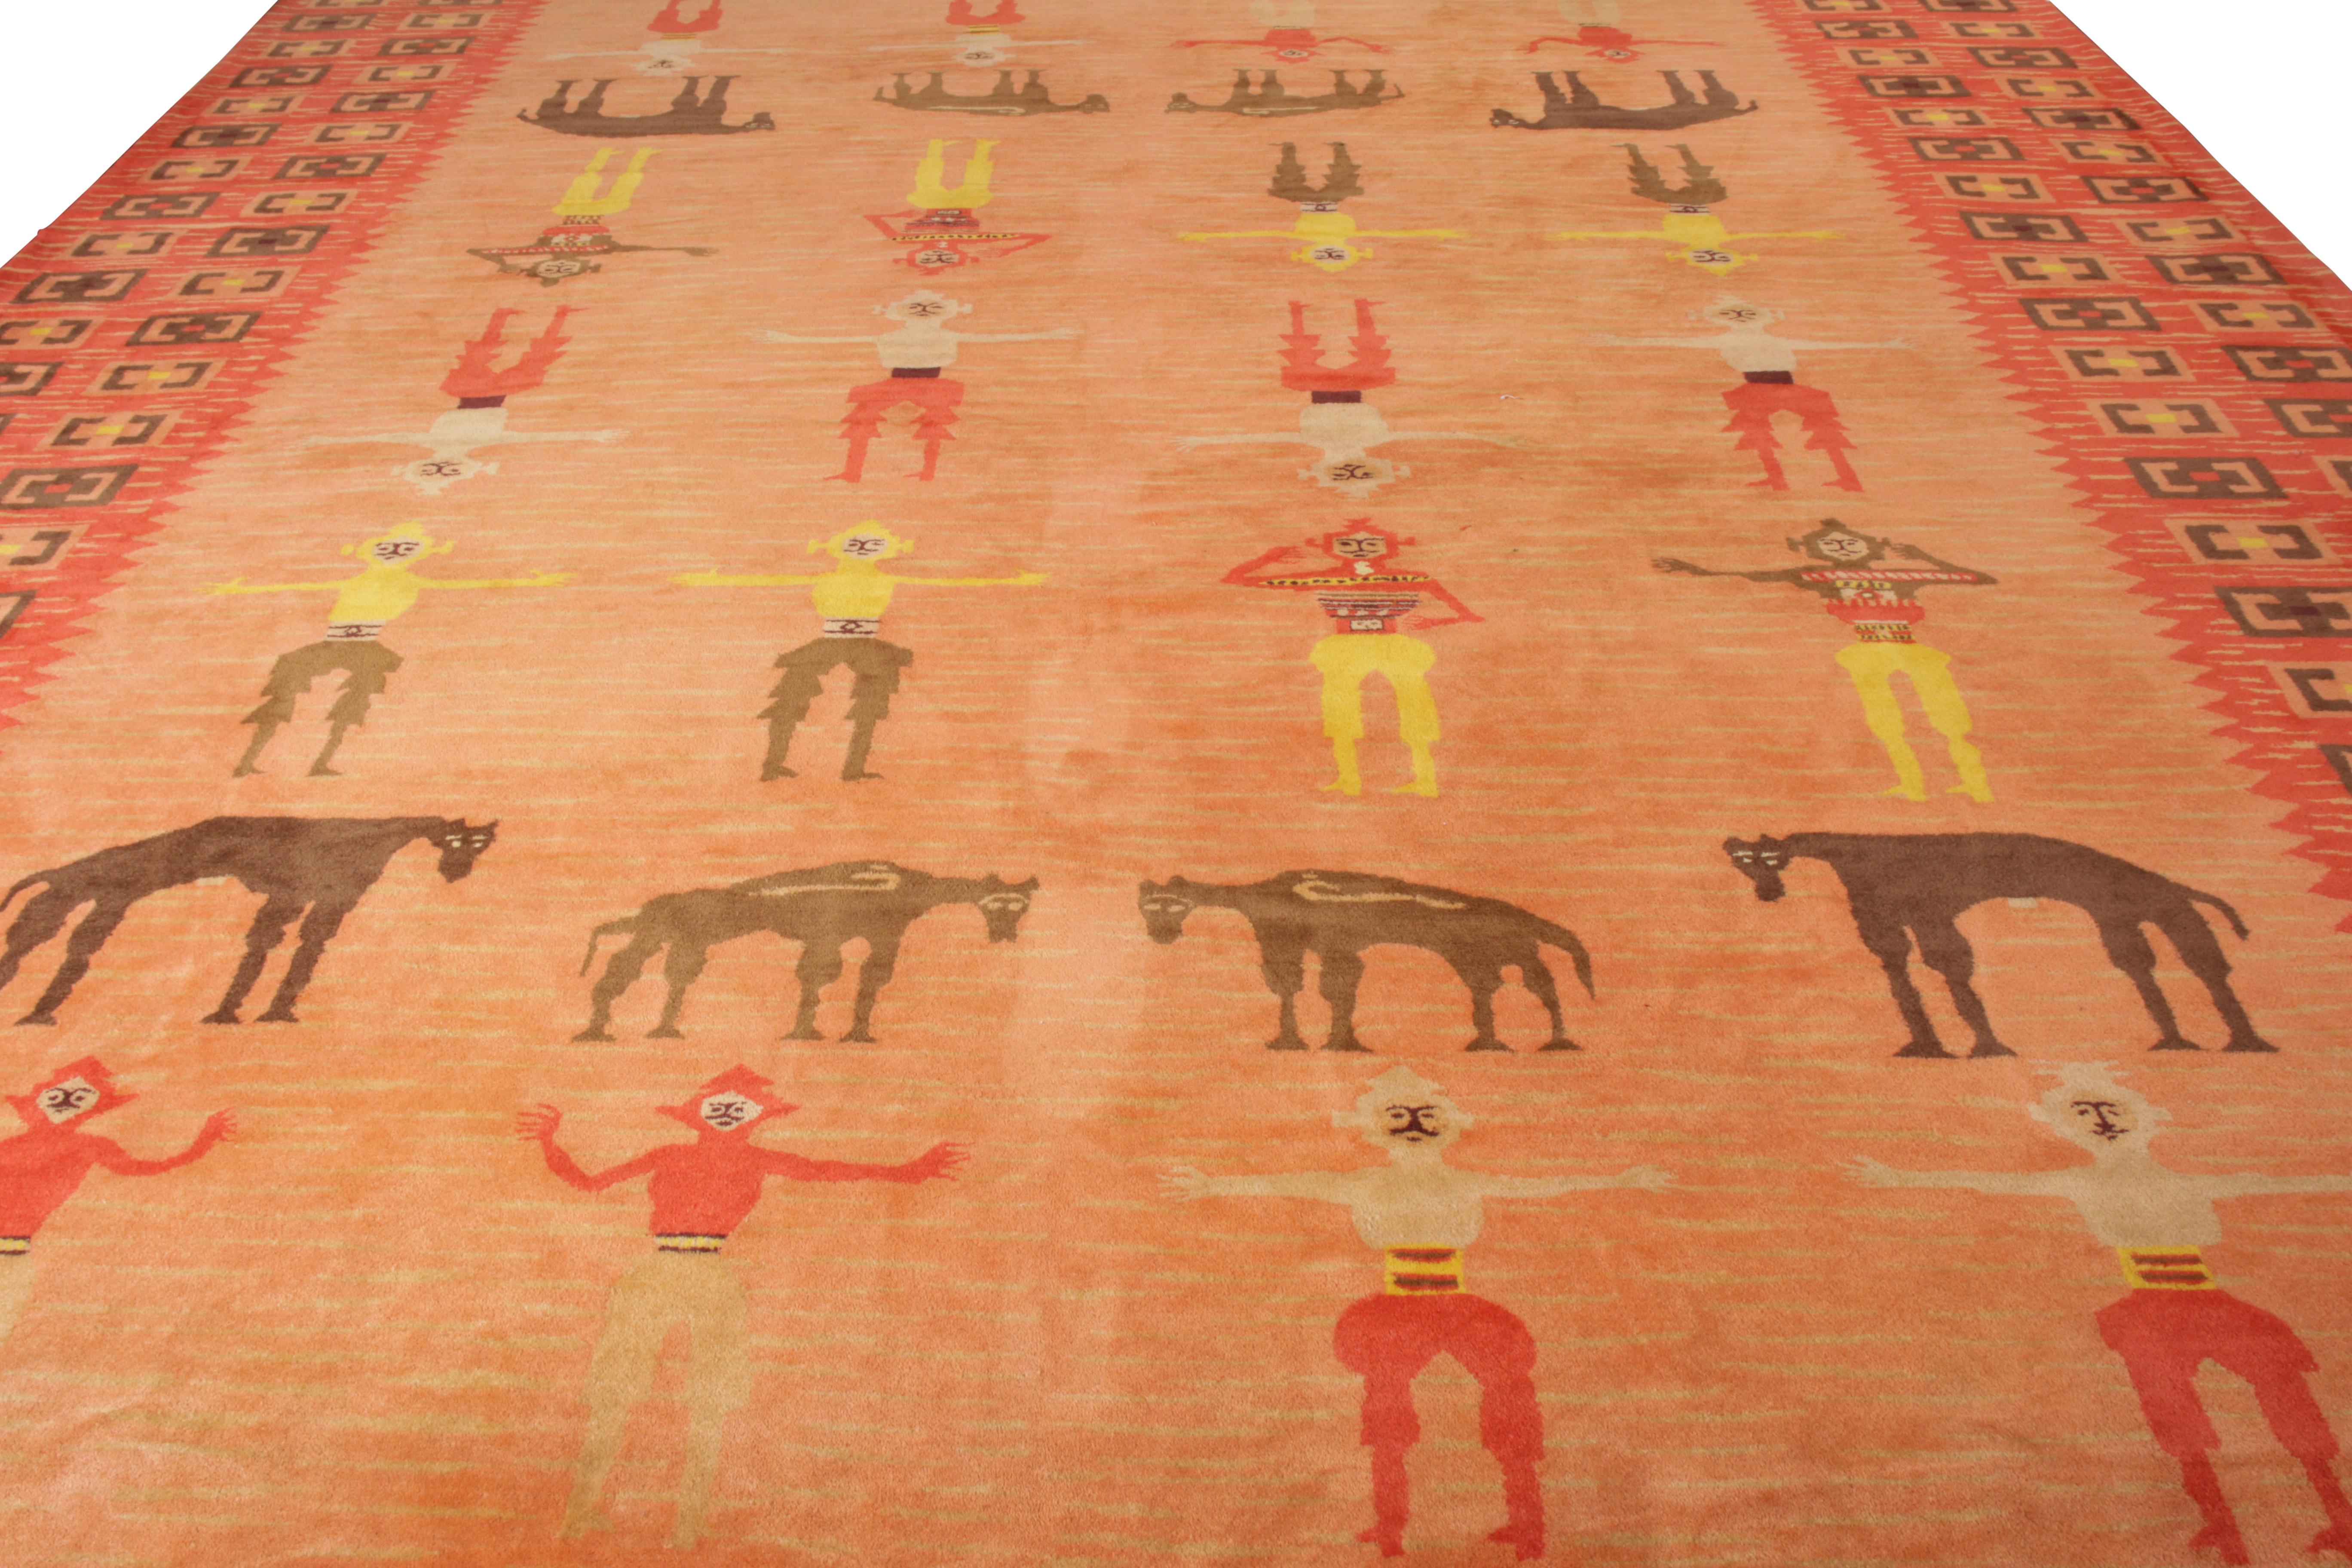 Hand knotted in wool circa 1950-1960, a rare vintage pictorial rug in 13x15 size. Believed to originate from Germany, enjoying a union of defined pictorial motifs portraying human and animal figures with a warm pink-red colorway palette—reflecting